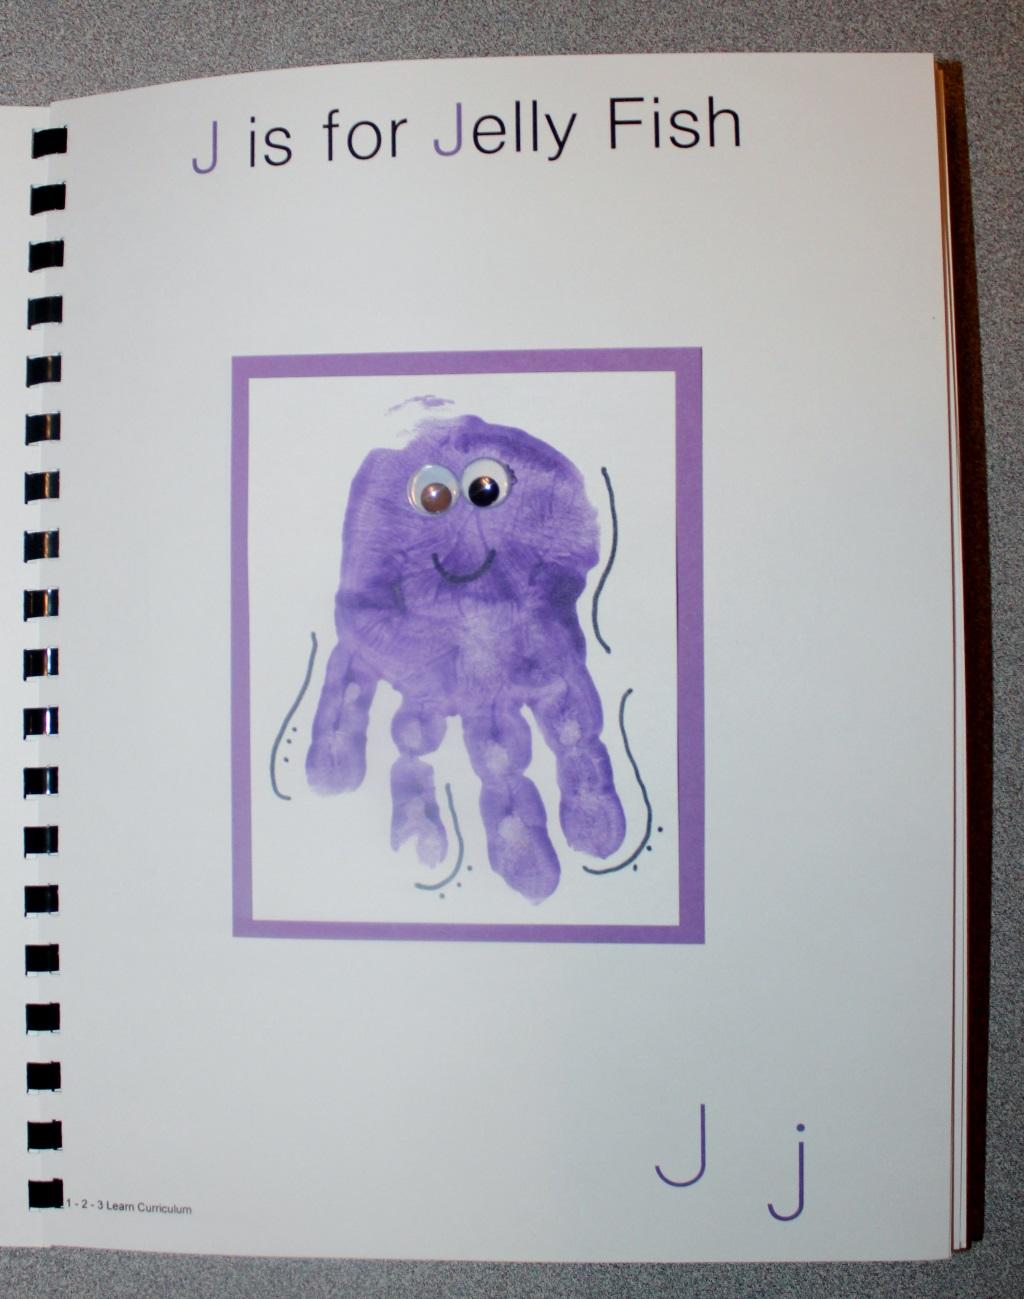 J is for Jelly Fish Paint the child s hand purple and place on white card stock. When dry draw a few lines around the fingers and dots.